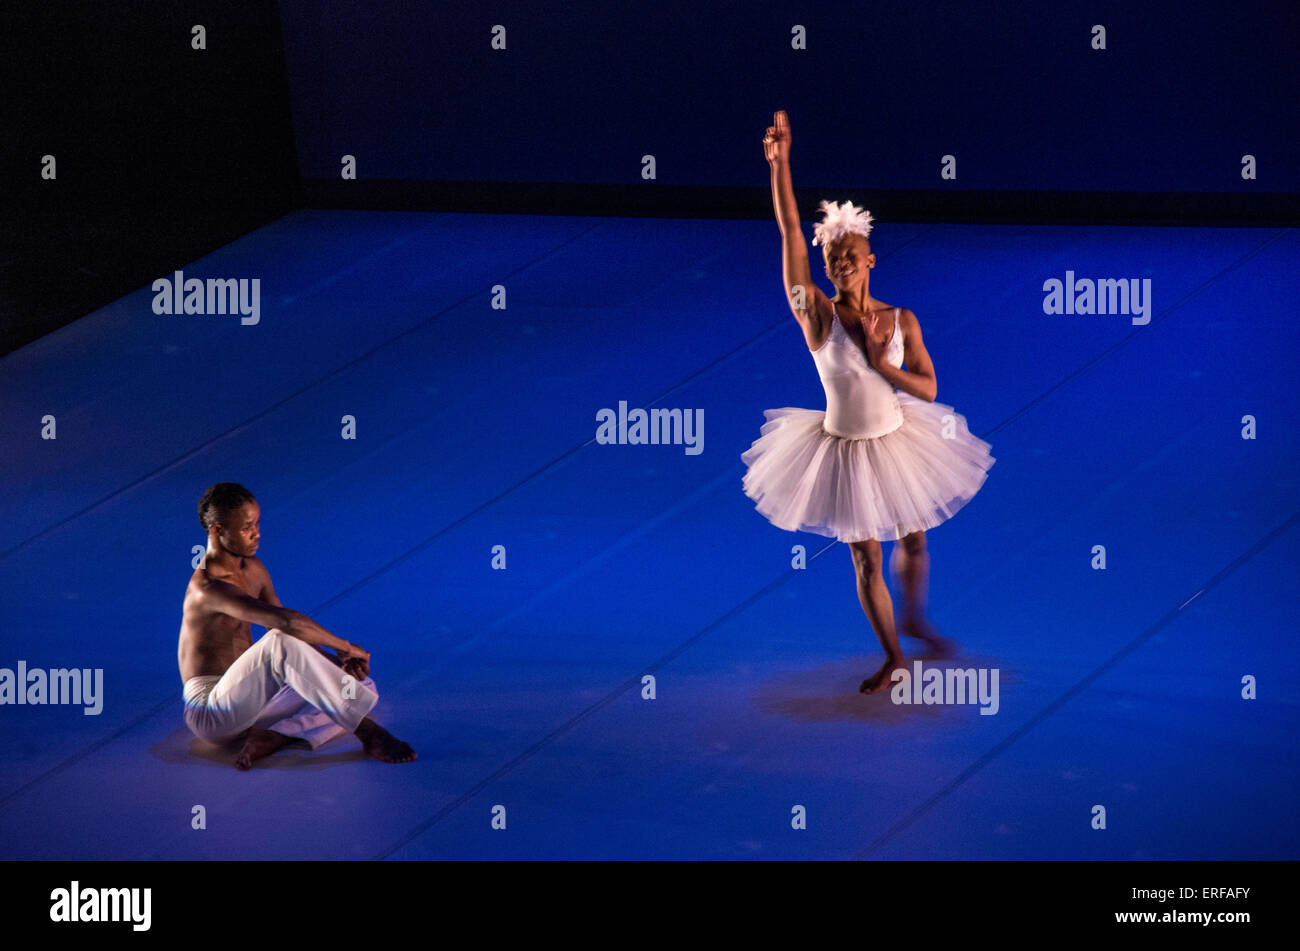 South African dancer Dada Masilo and male partner in her unusual version of Swan Lake. Stock Photo